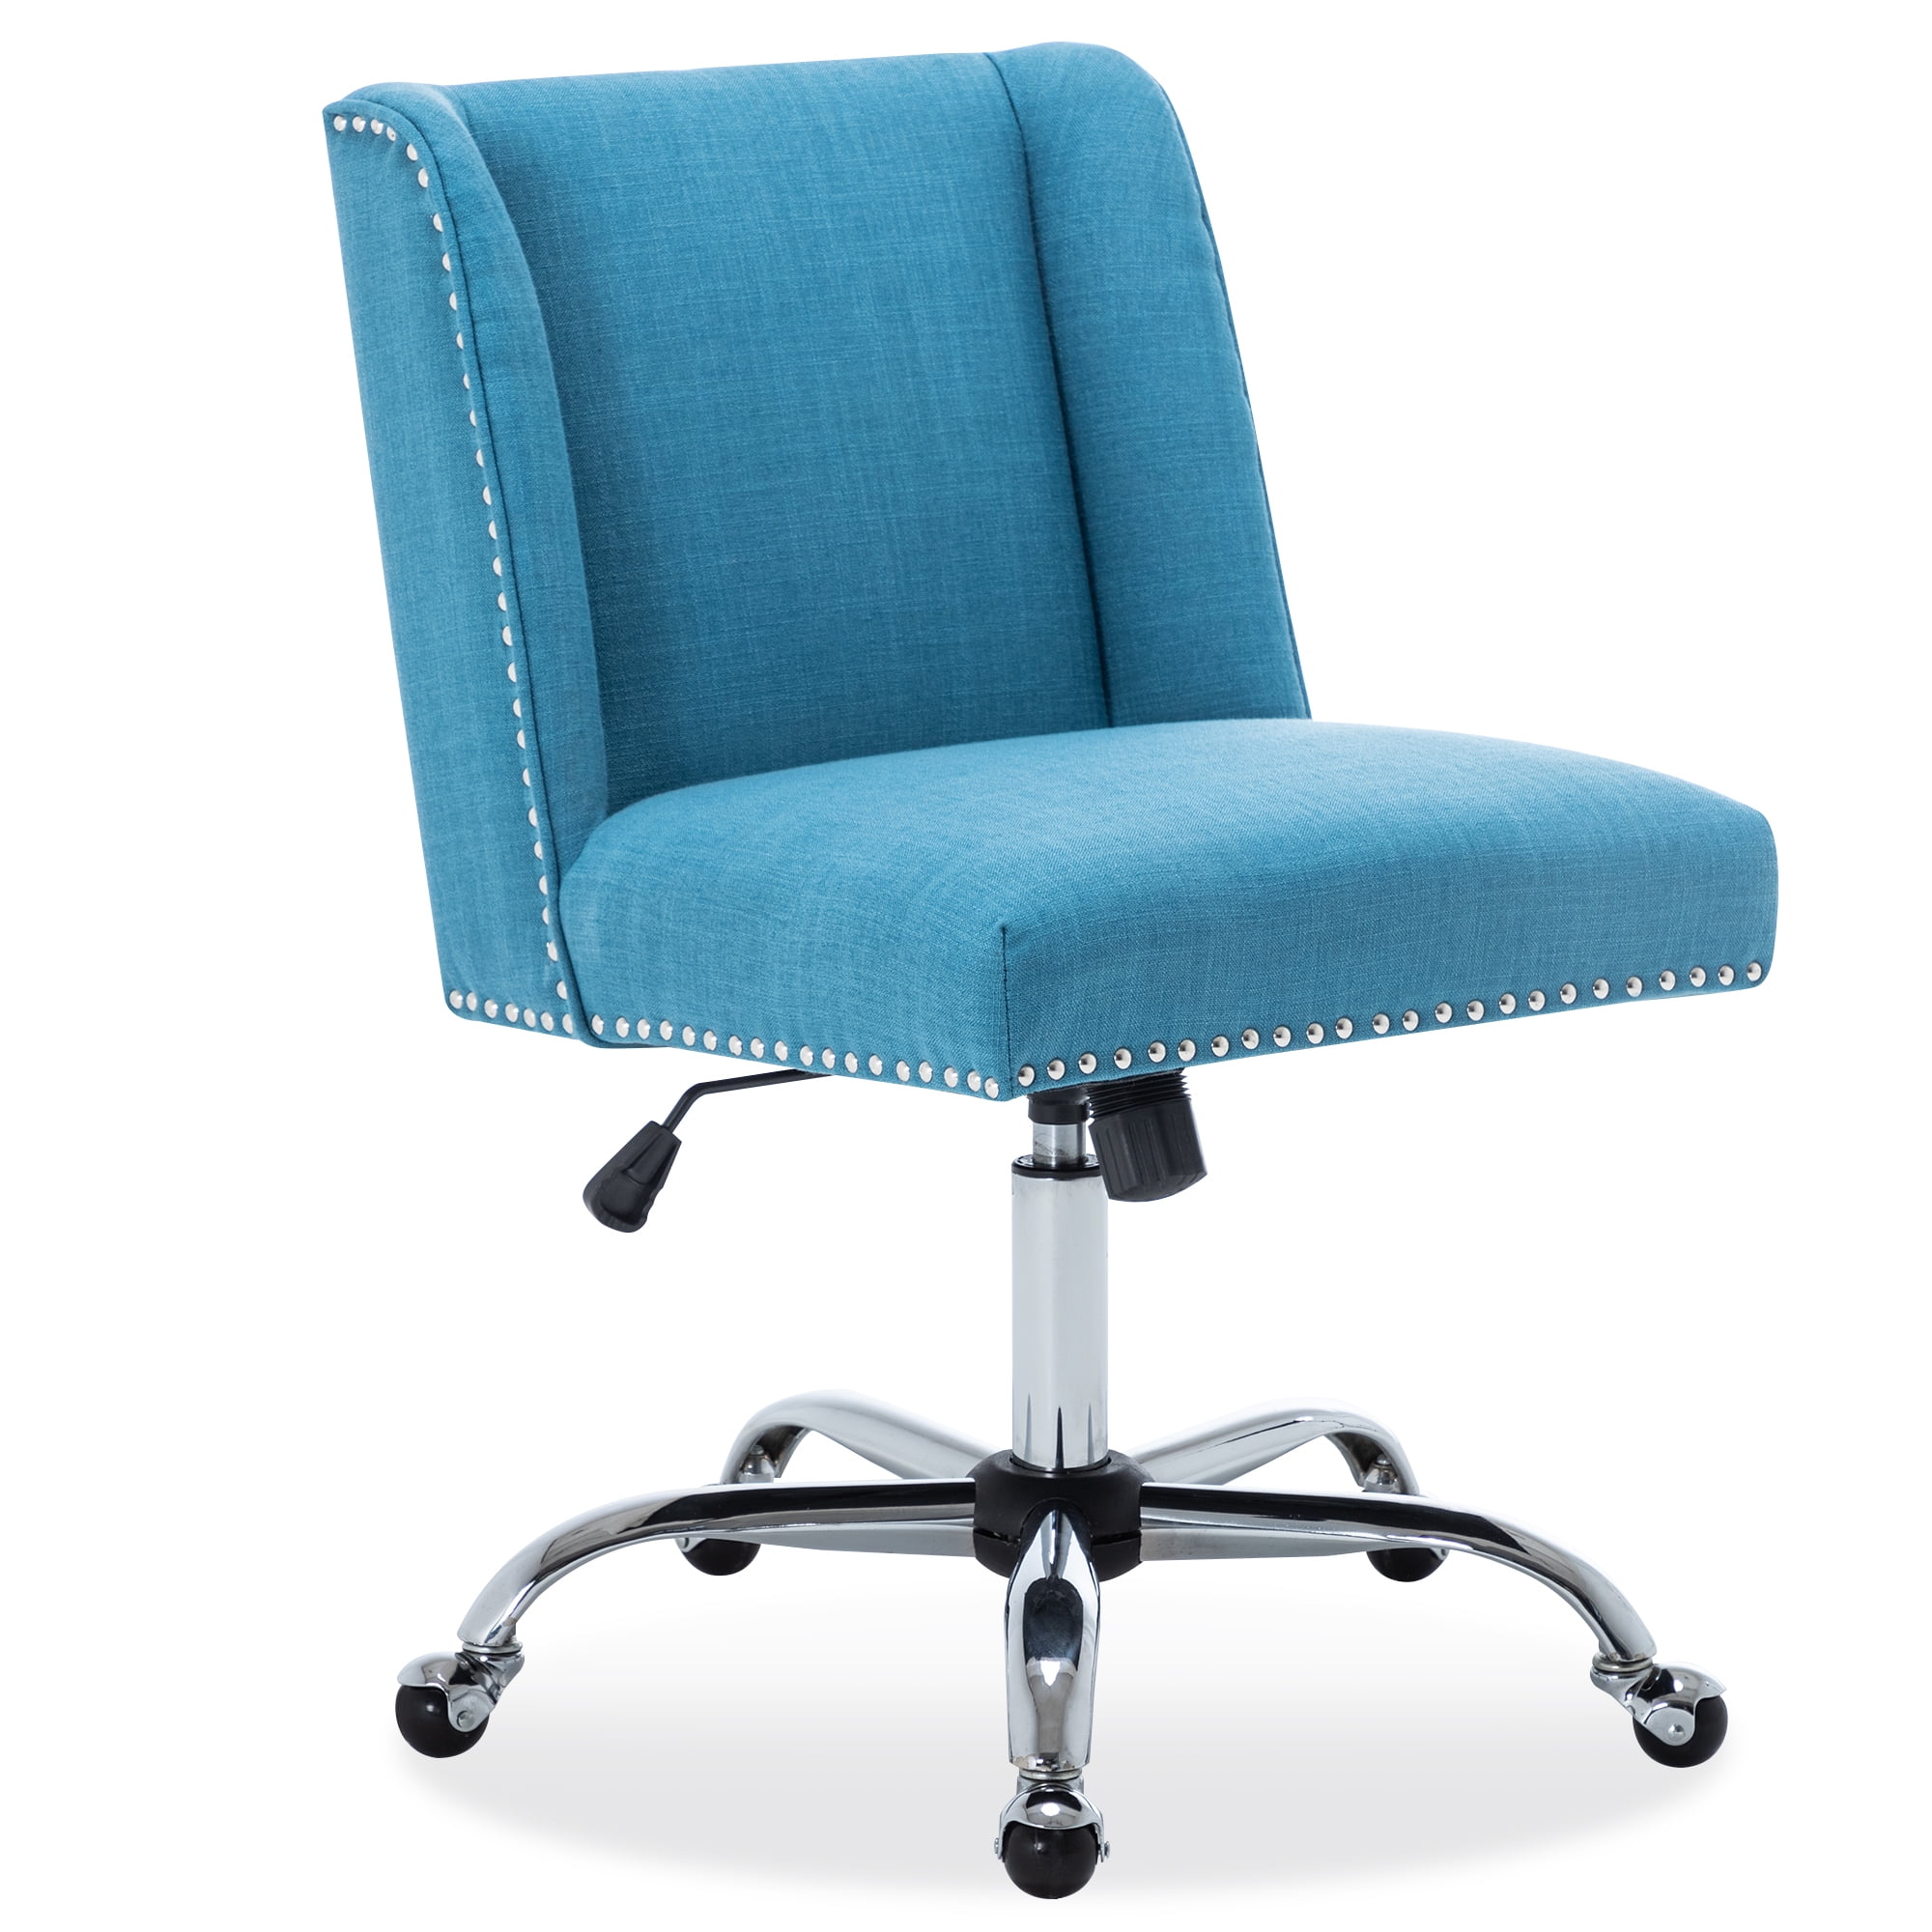 BELLEZE Upholstered Fabric Office Chair Nailhead Trim ...